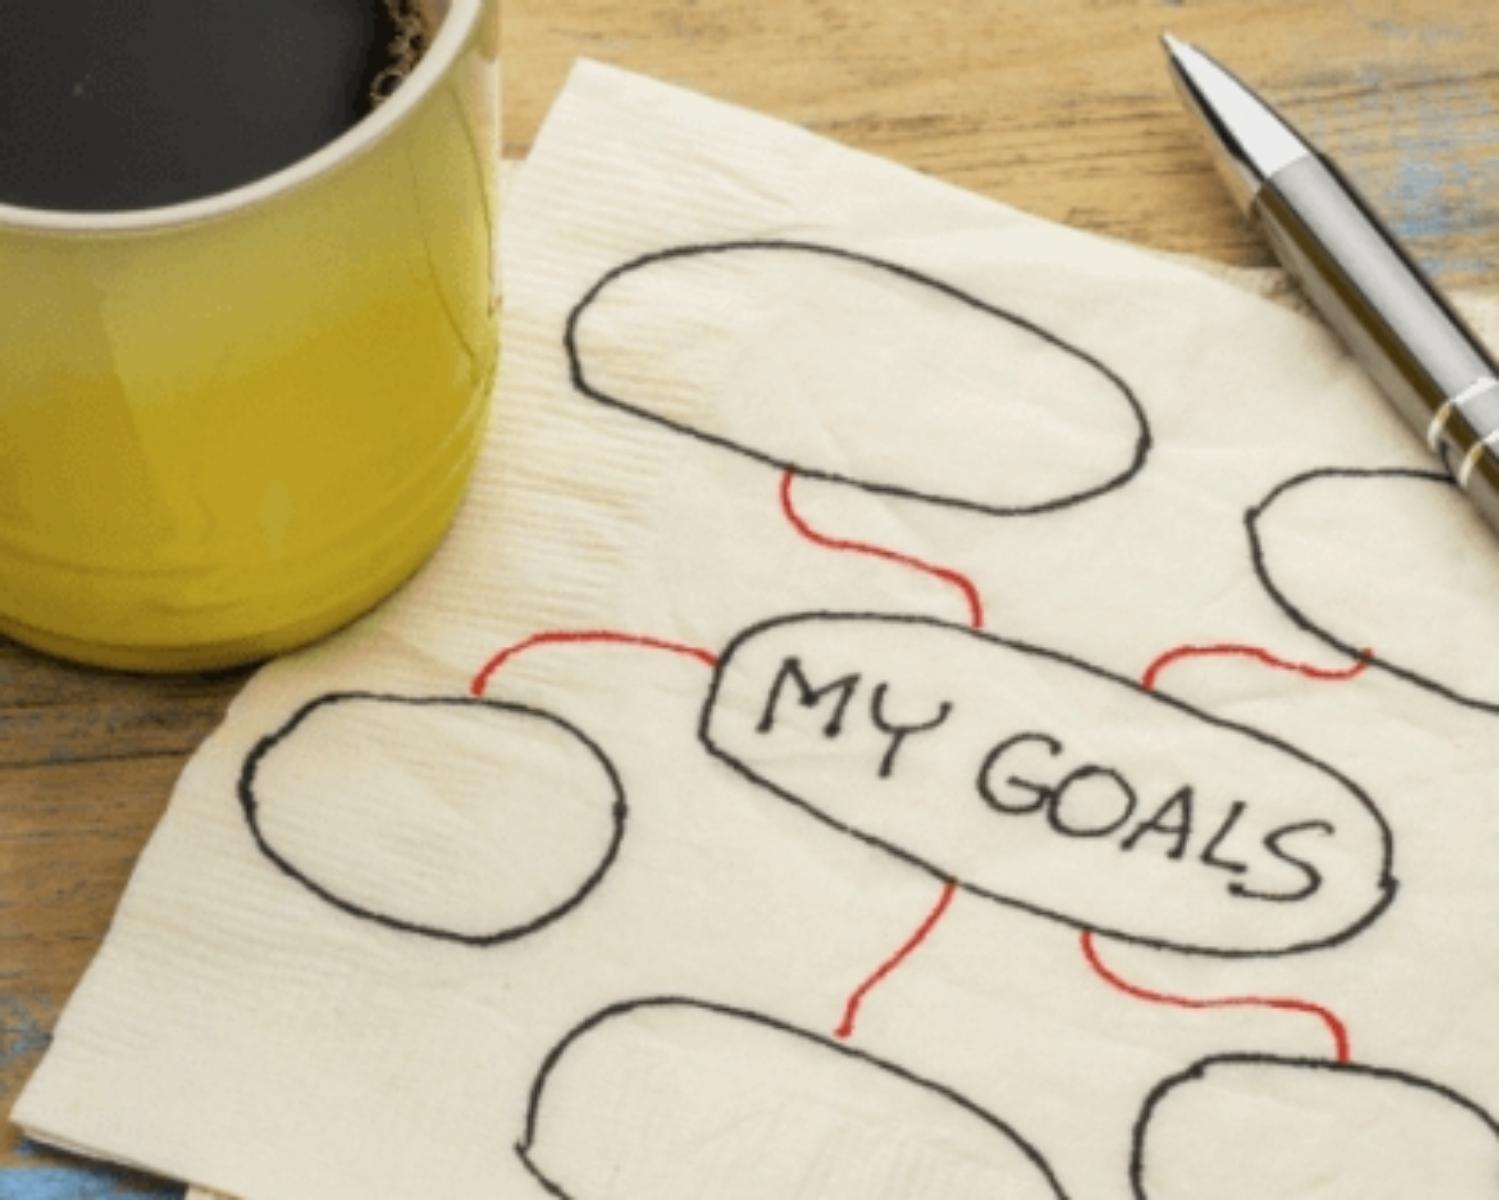 3. Set simple goals that you can accomplish for the day